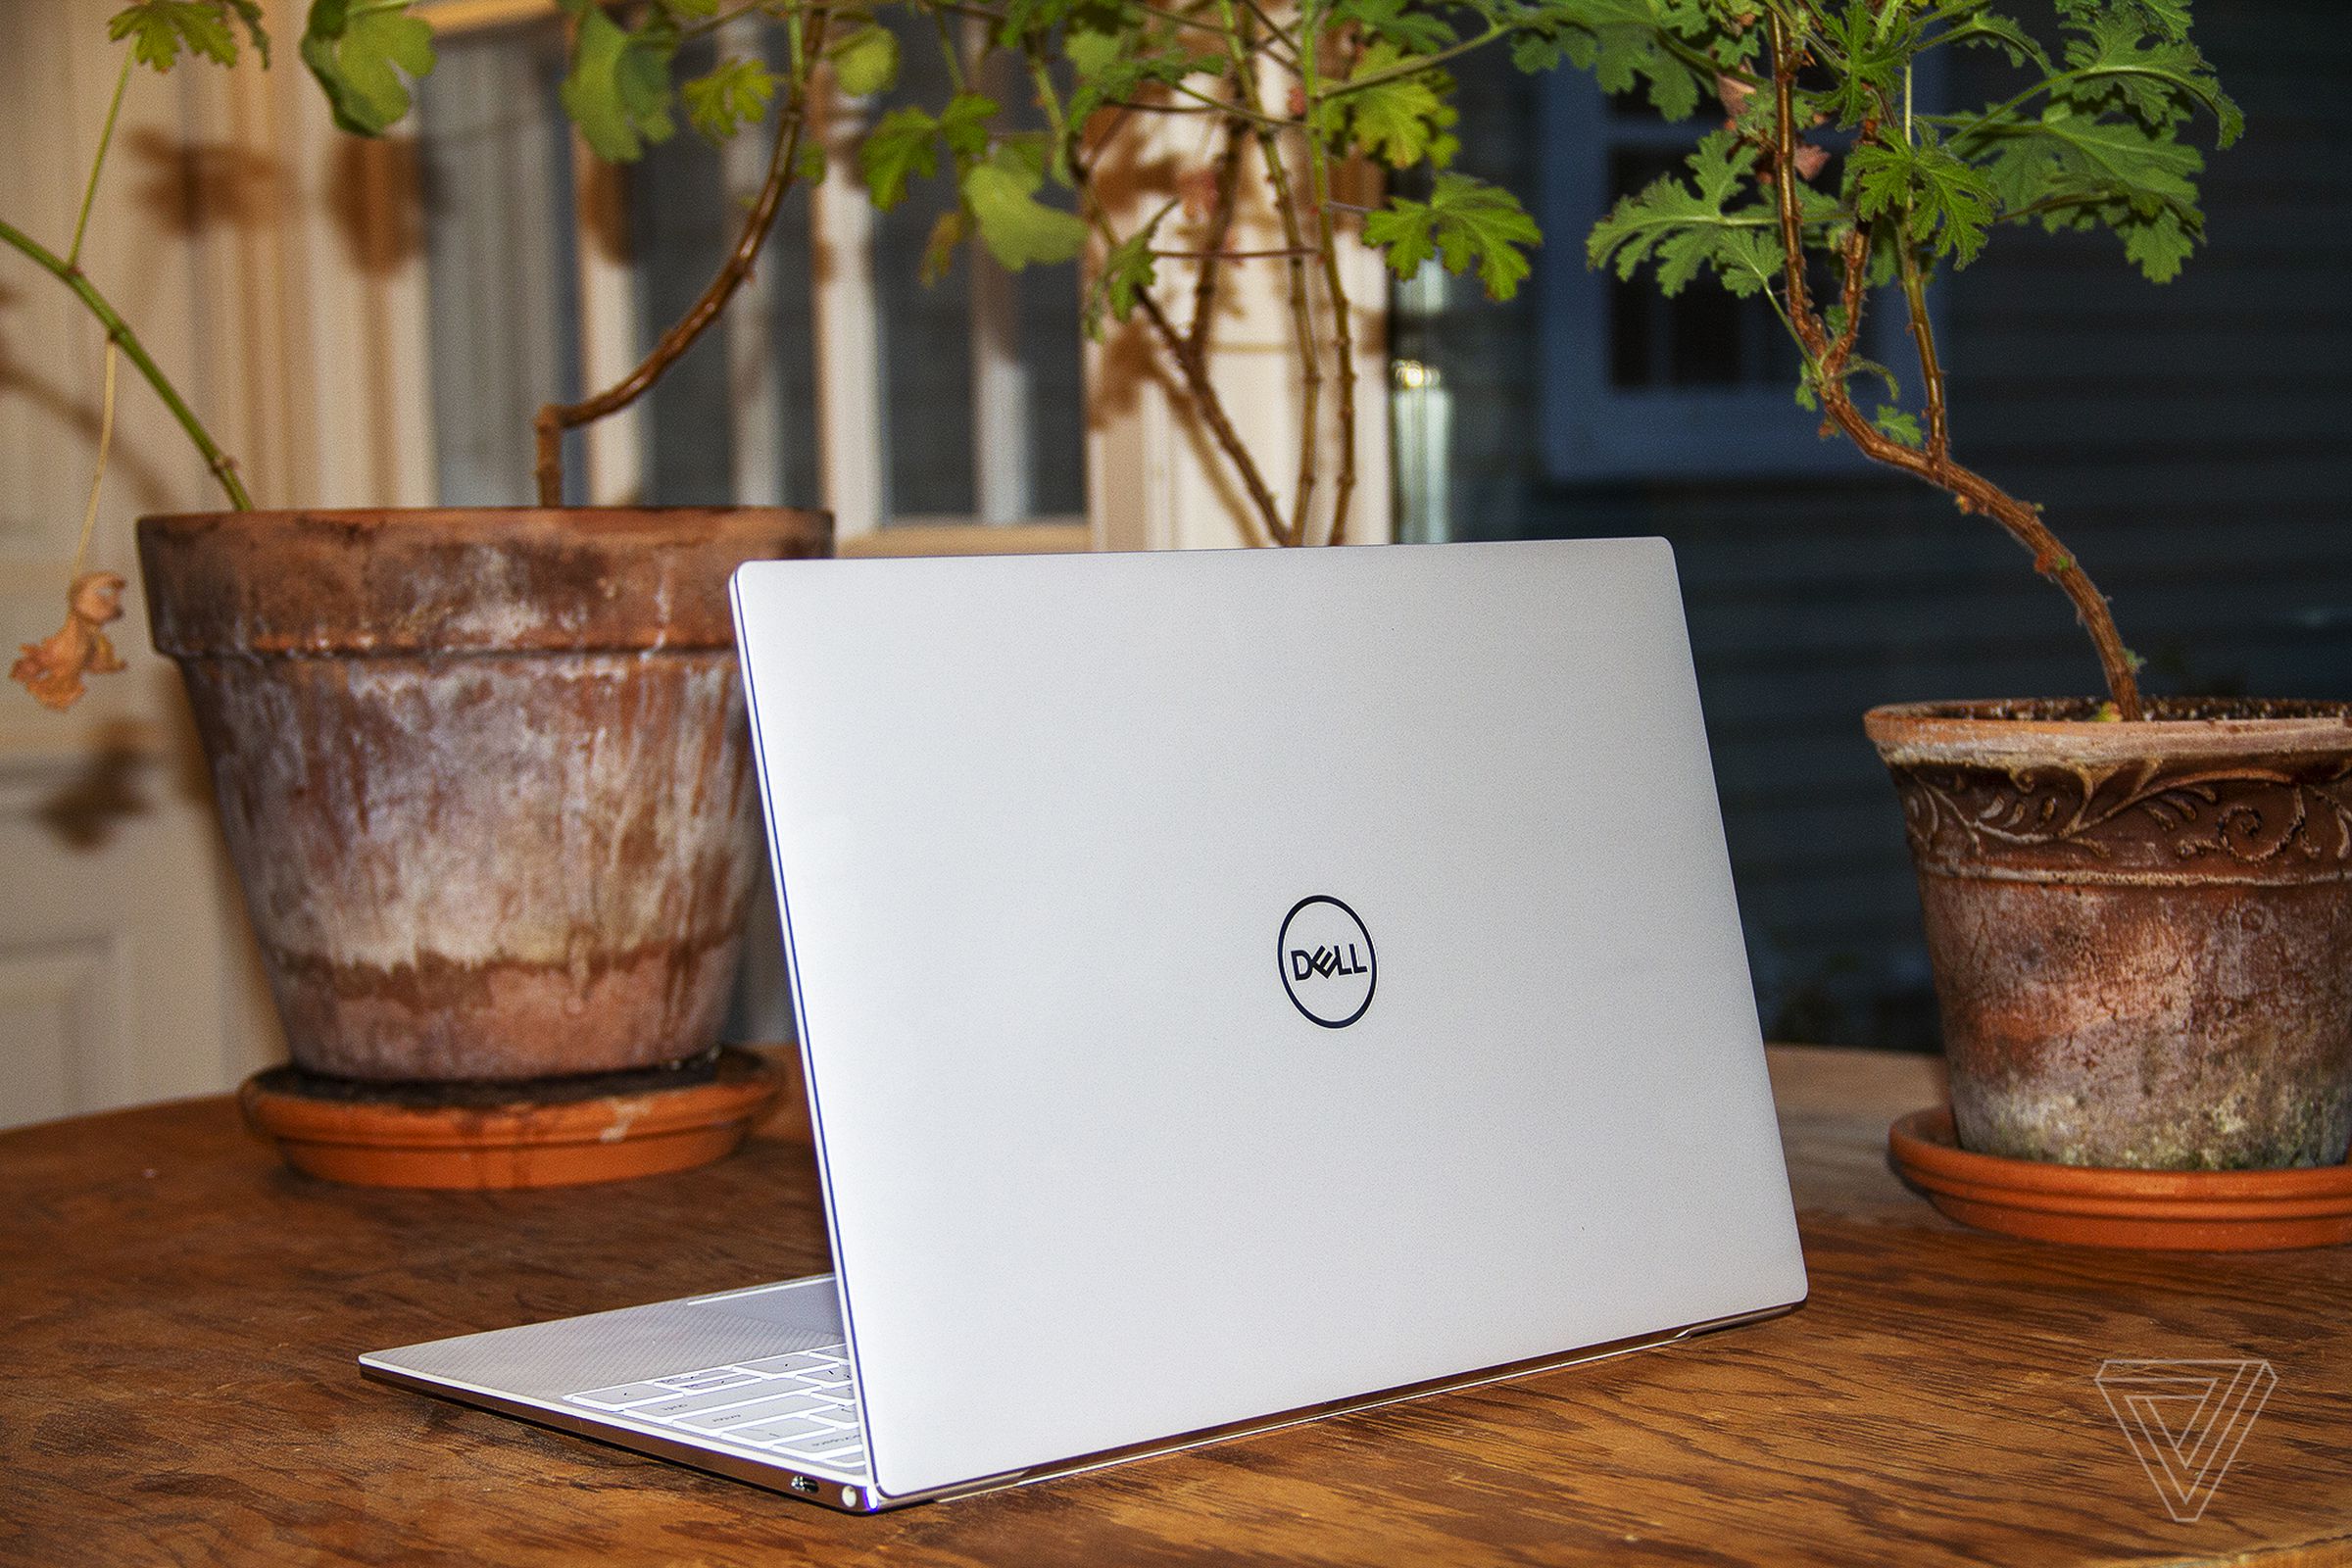 The Dell XPS 13 from the back, angled to the left.